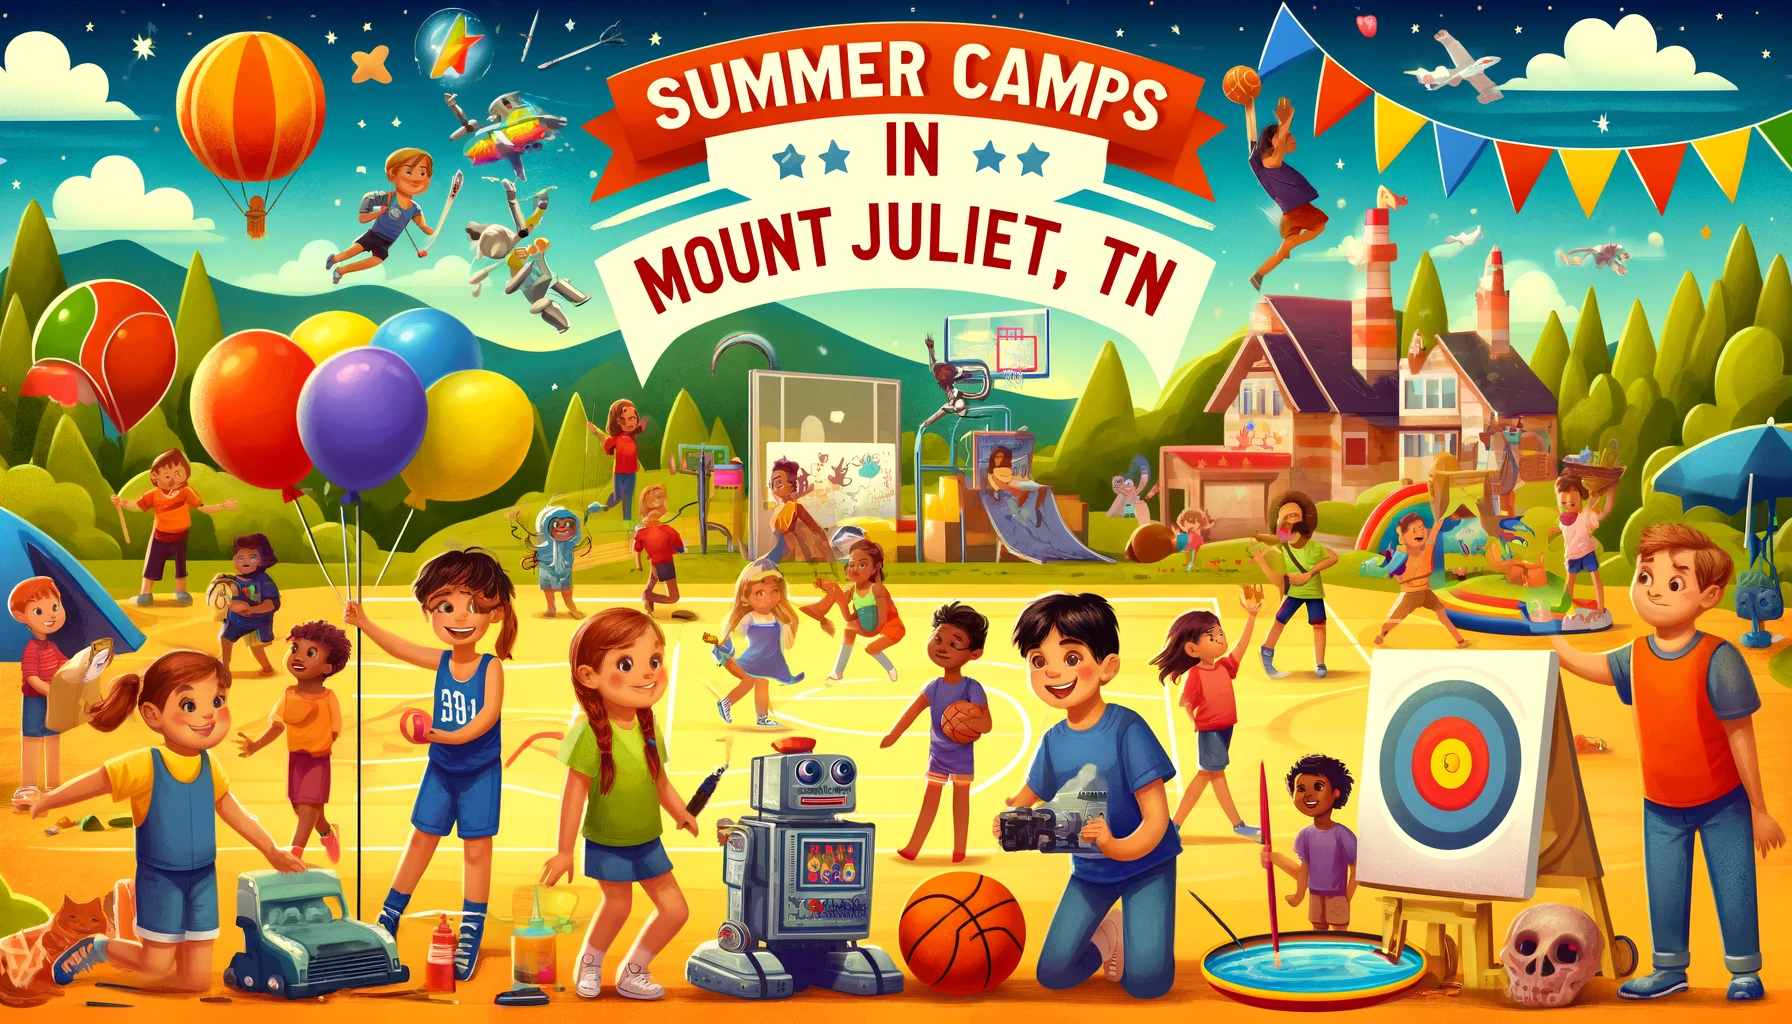 Summer Camps in Mount Juliet, TN - Ultimate Guide to Fun and Adventure